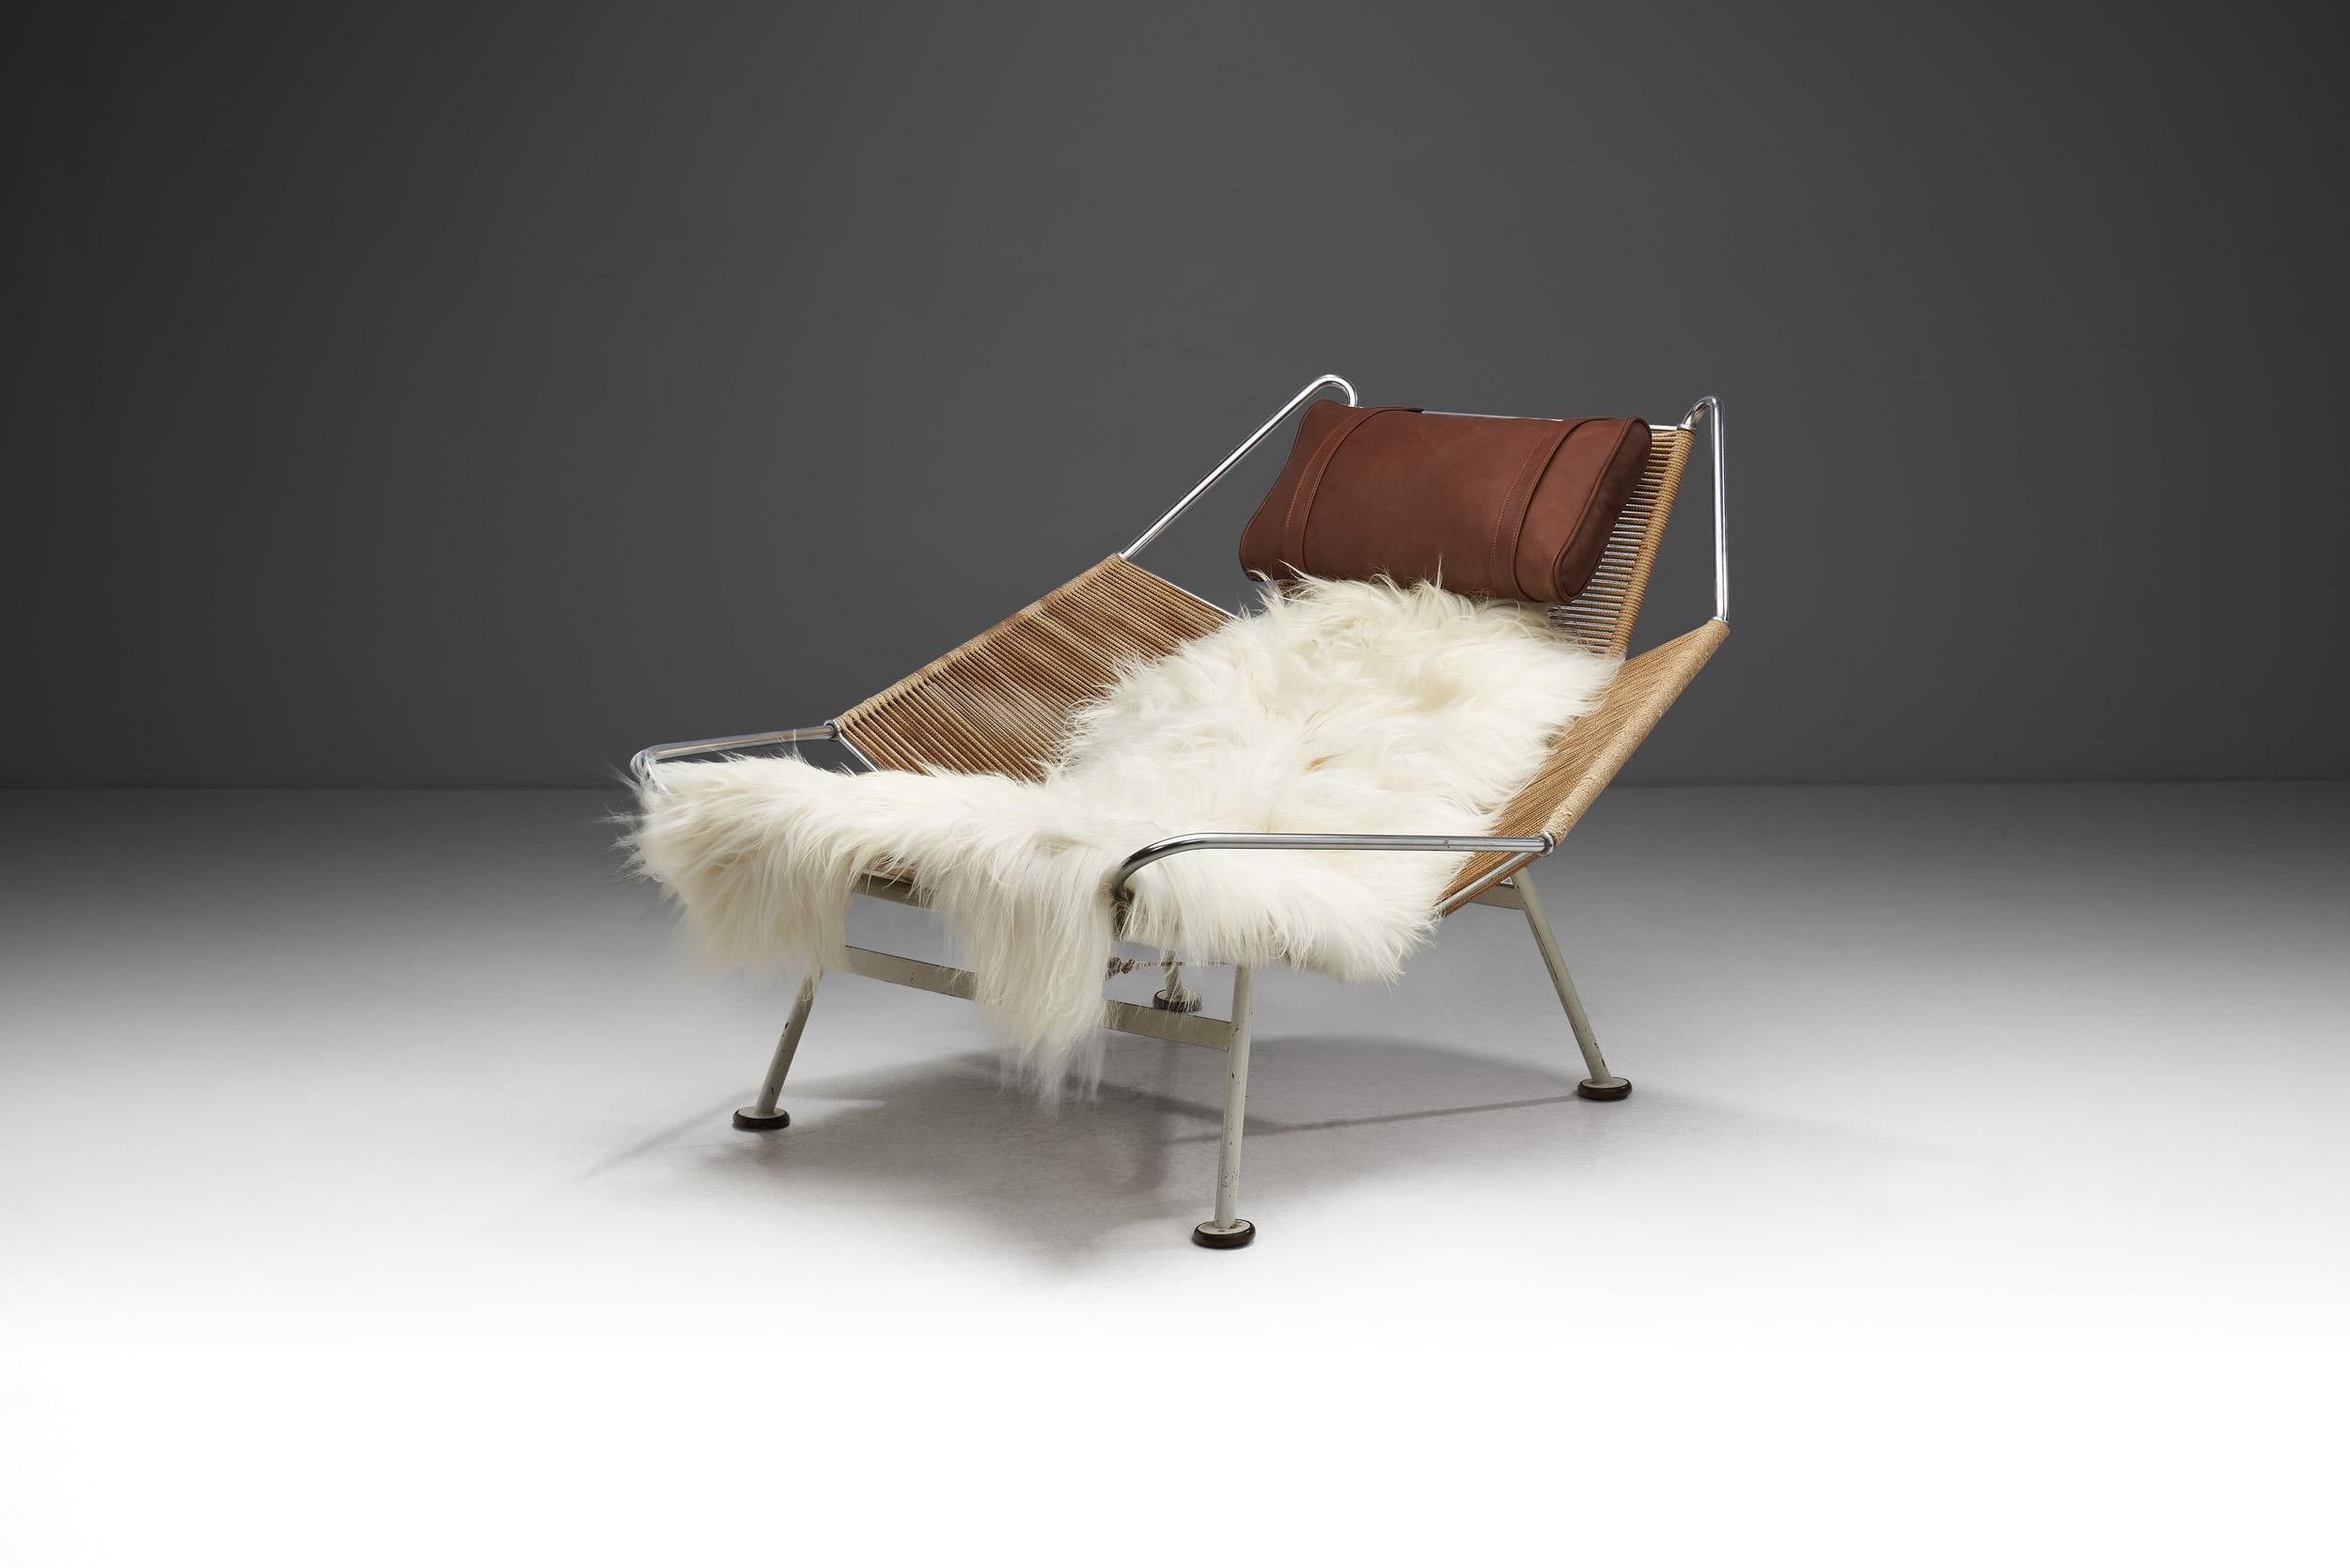 When this iconic model was released in 1950, the unusual combination of rope, white-varnished steel and sheepskin had never been seen before in the furniture industry. It was a way for Hans Wegner to demonstrate his ability to design innovative,